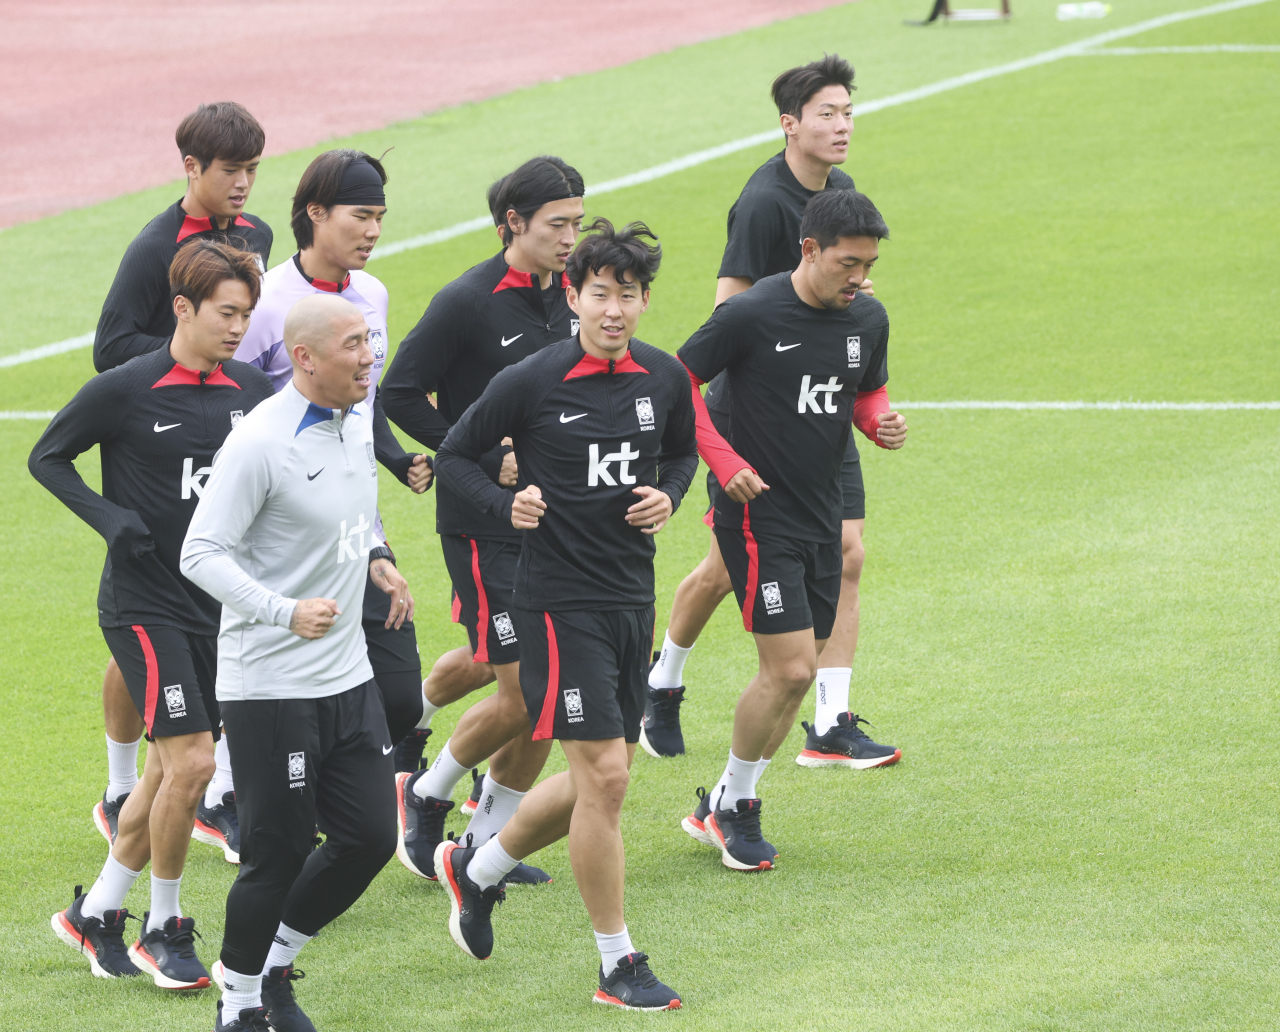 Son Heung-min (center), captain of the South Korean men's national football team, takes part in a training session at Gudeok Stadium in Busan on Monday. (Yonhap)